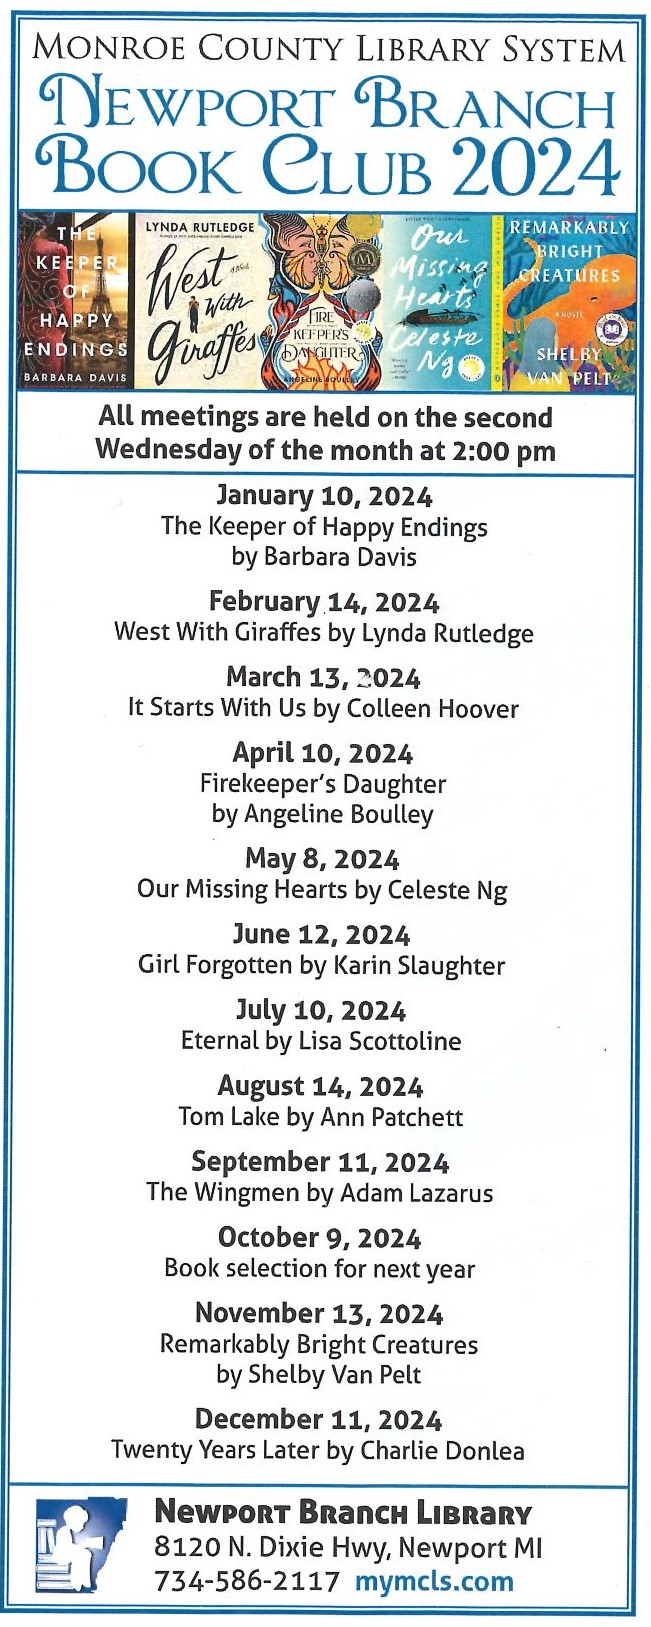 Flyer with list of titles for the year.